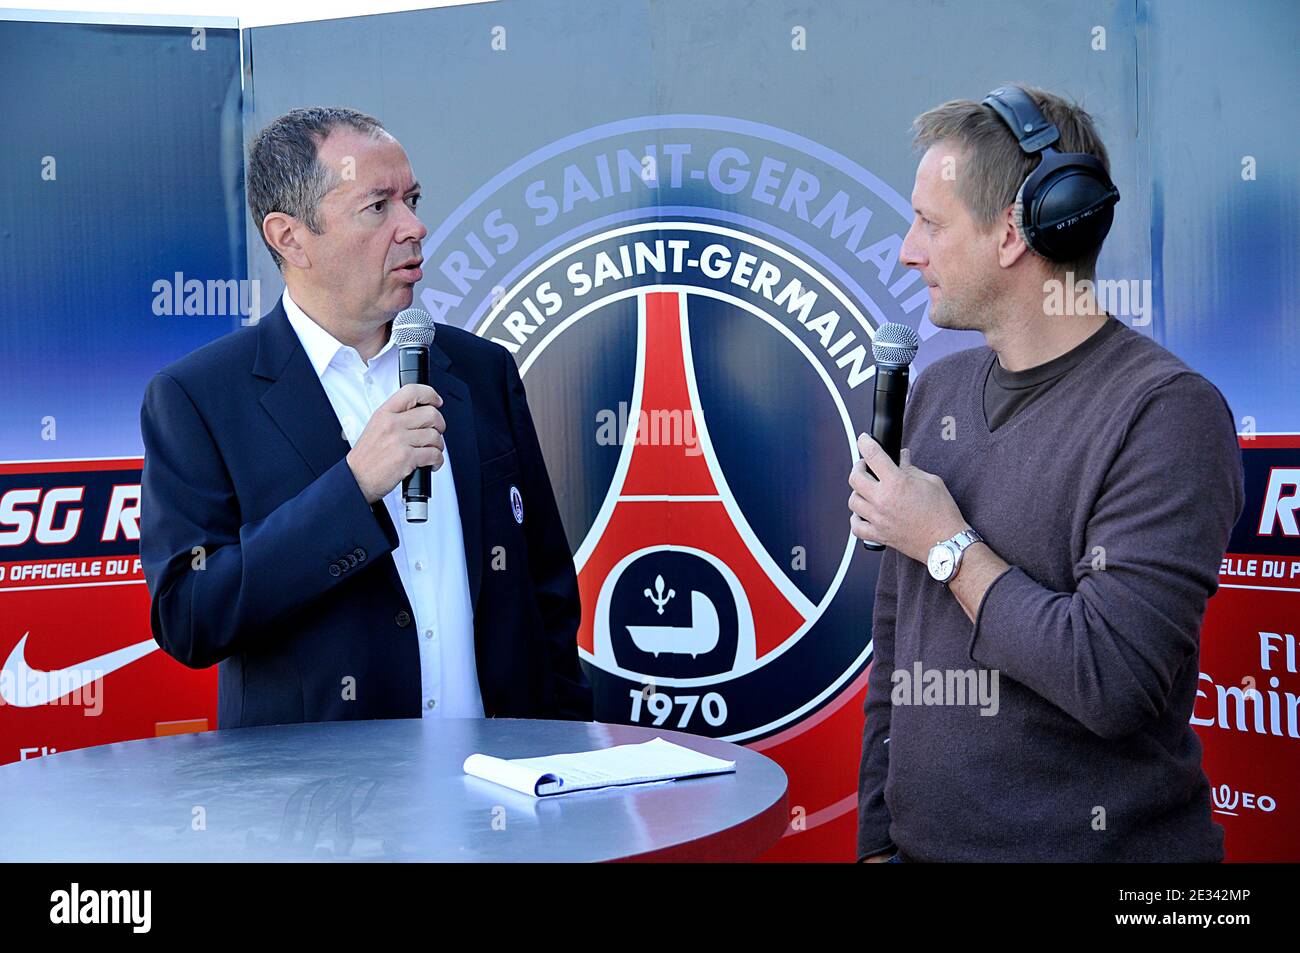 Paris Saint-Germain (PSG) football team president Robin Leproux and French  radioman Max attend the launch of PSG radio to 'le Camp des Loges' in  Saint-Germain-en-Laye near Paris, France on Wednesday September 22,